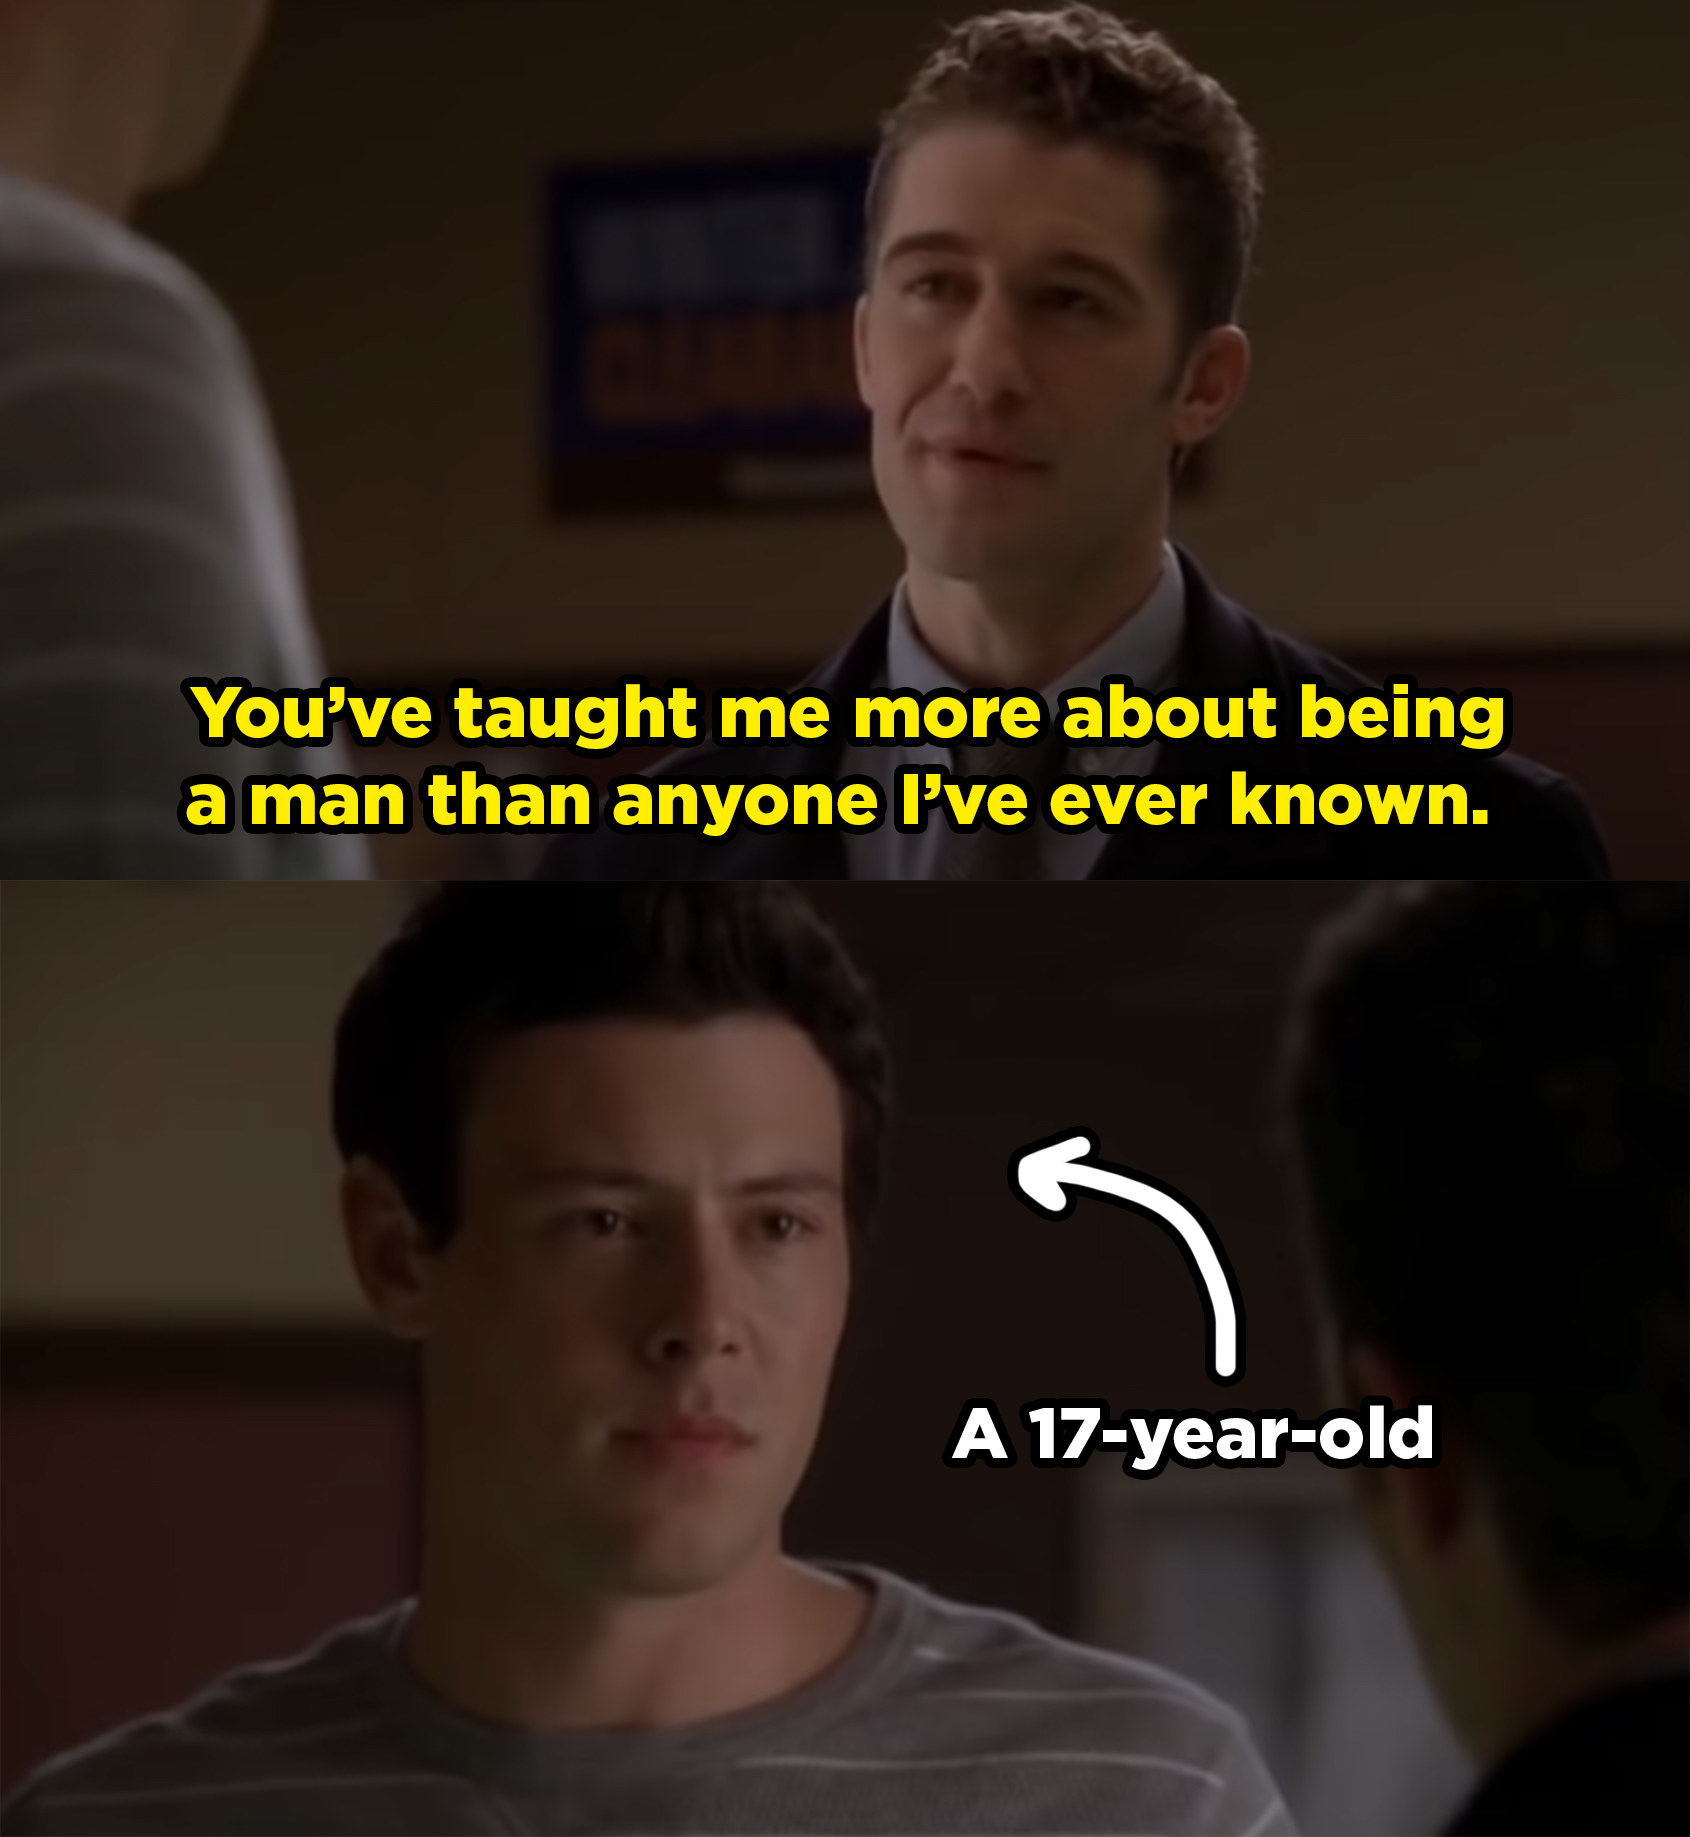 Schue tells Finn, a 17 year old, that he&#x27;s taught him more about being a man than anyone ever has